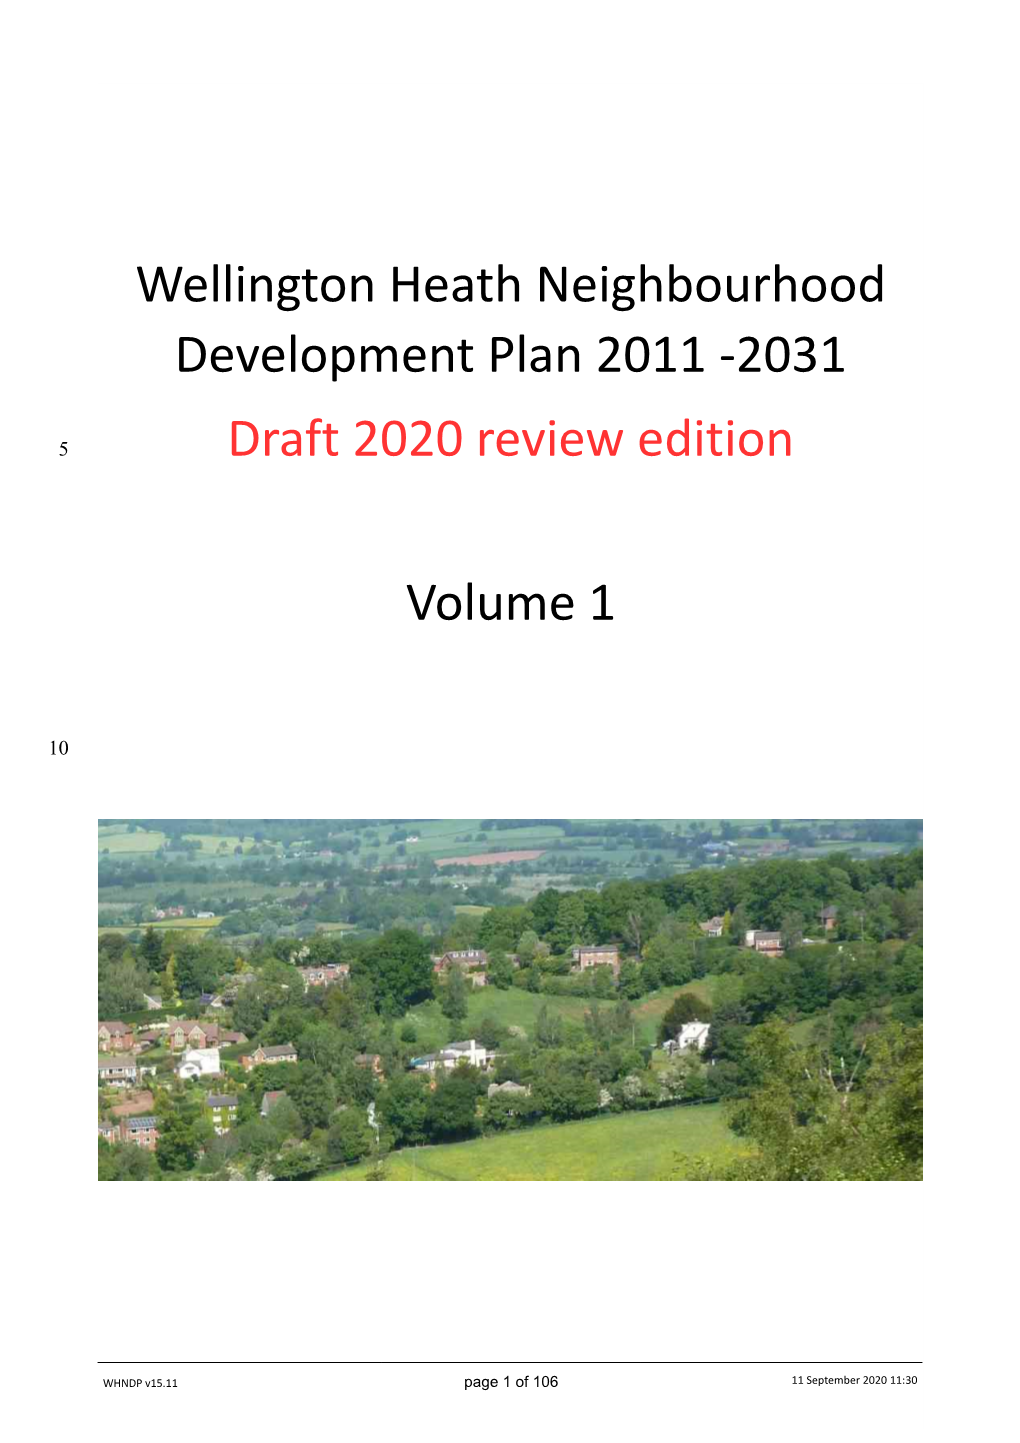 2031 Draft 2020 Review Edition Volume 1